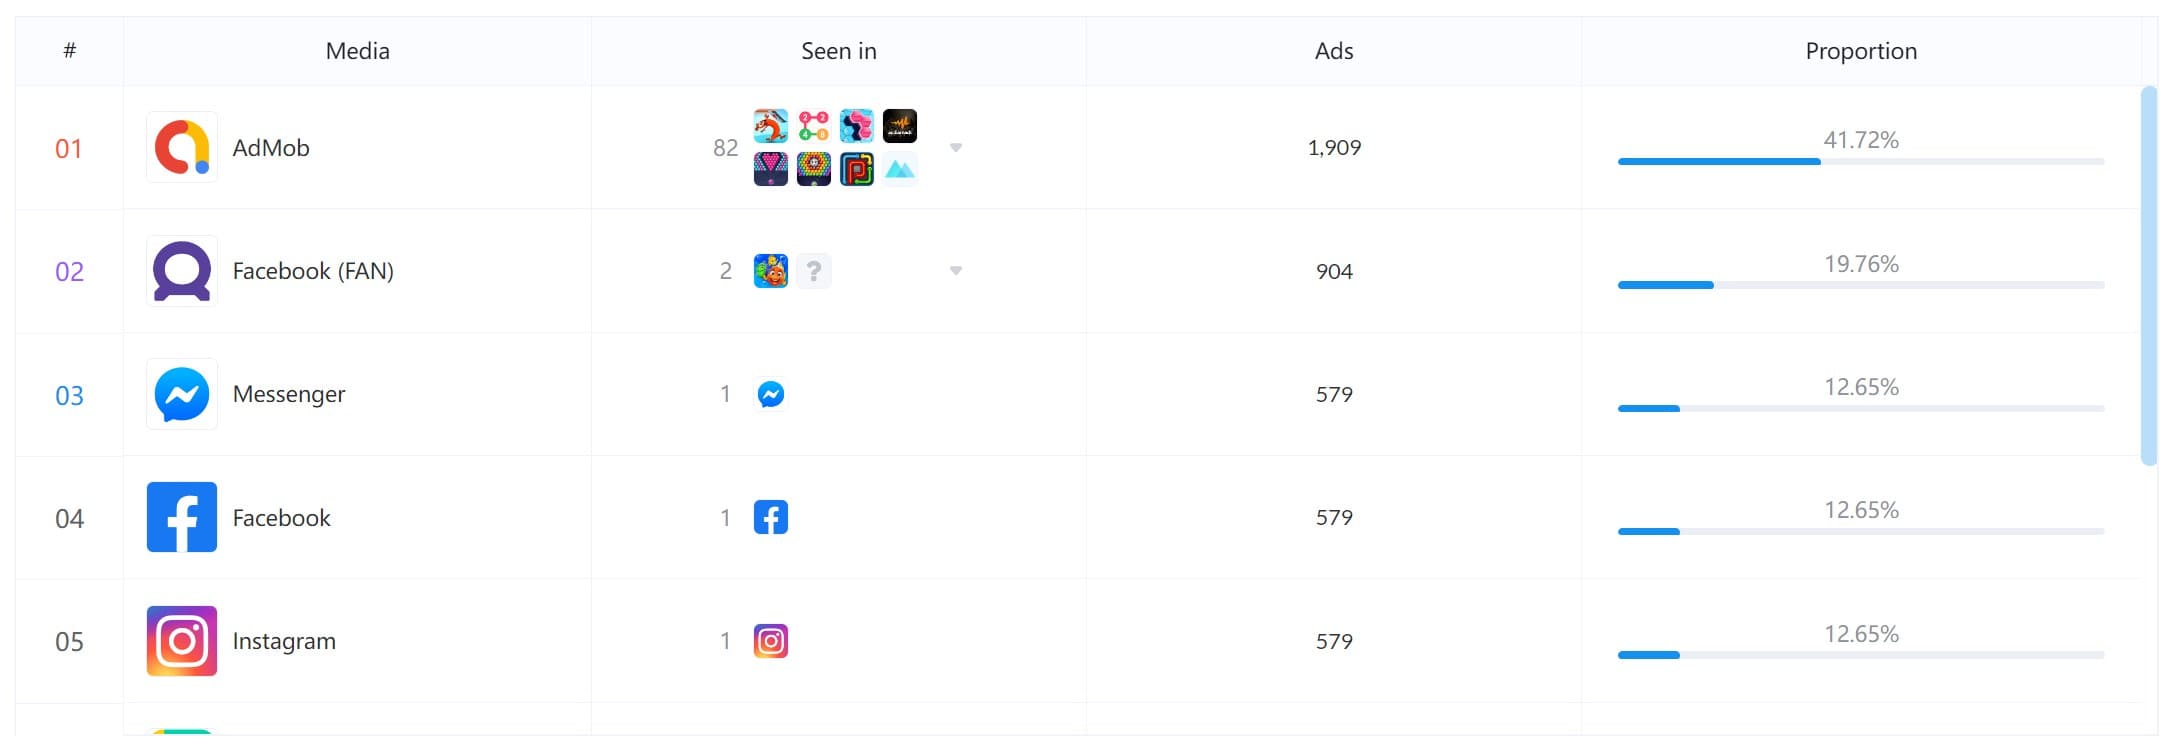 The most used media platform for Chiến Thần AFK’s ads is AdMob, which is Google’s mobile advertising network.